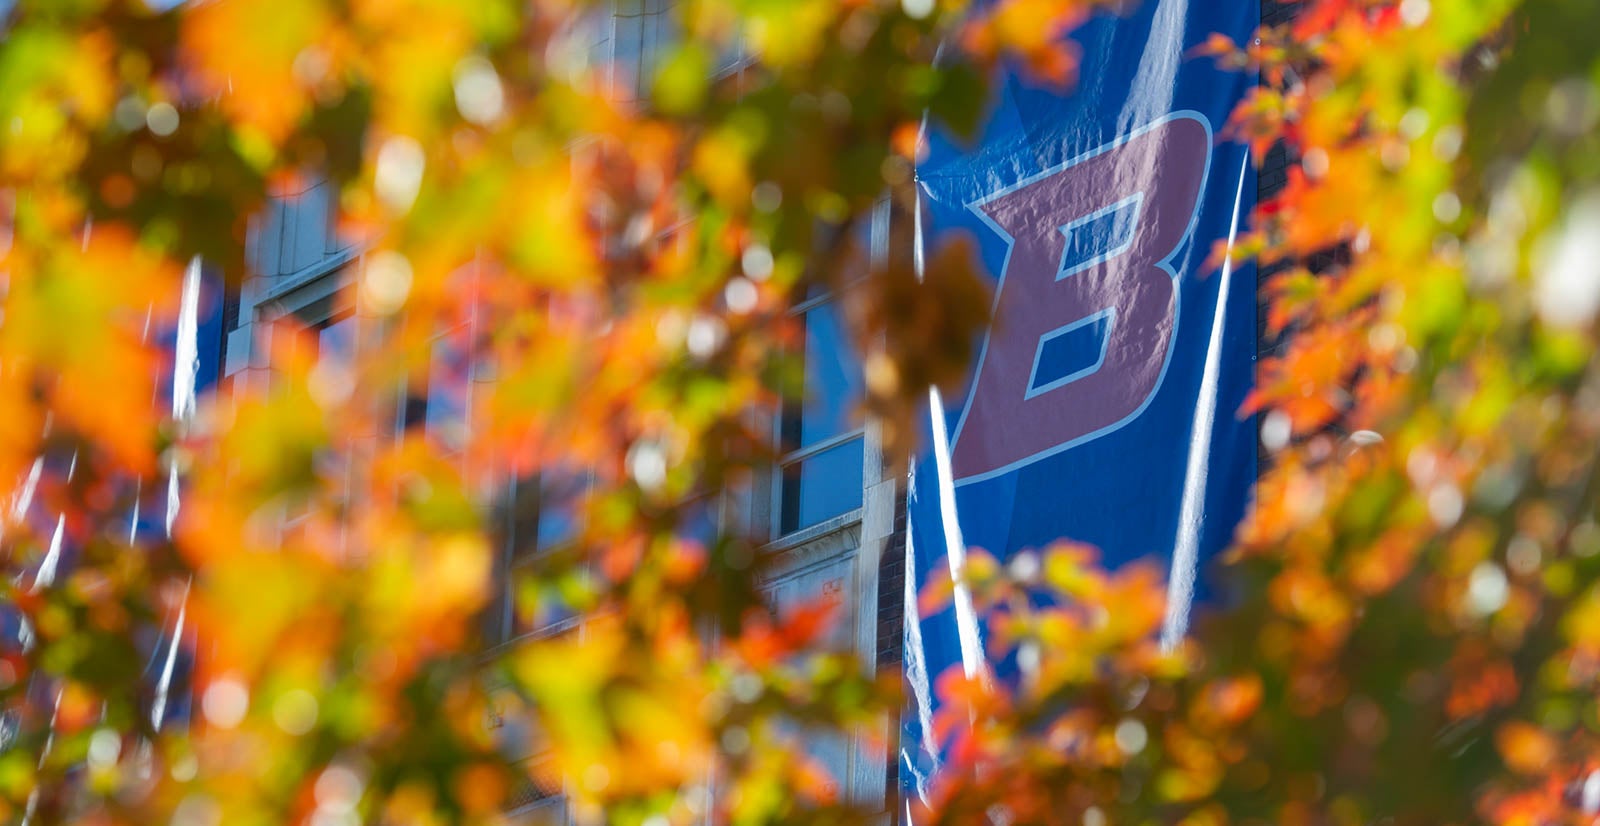 Boise State banner viewed through fall leaves